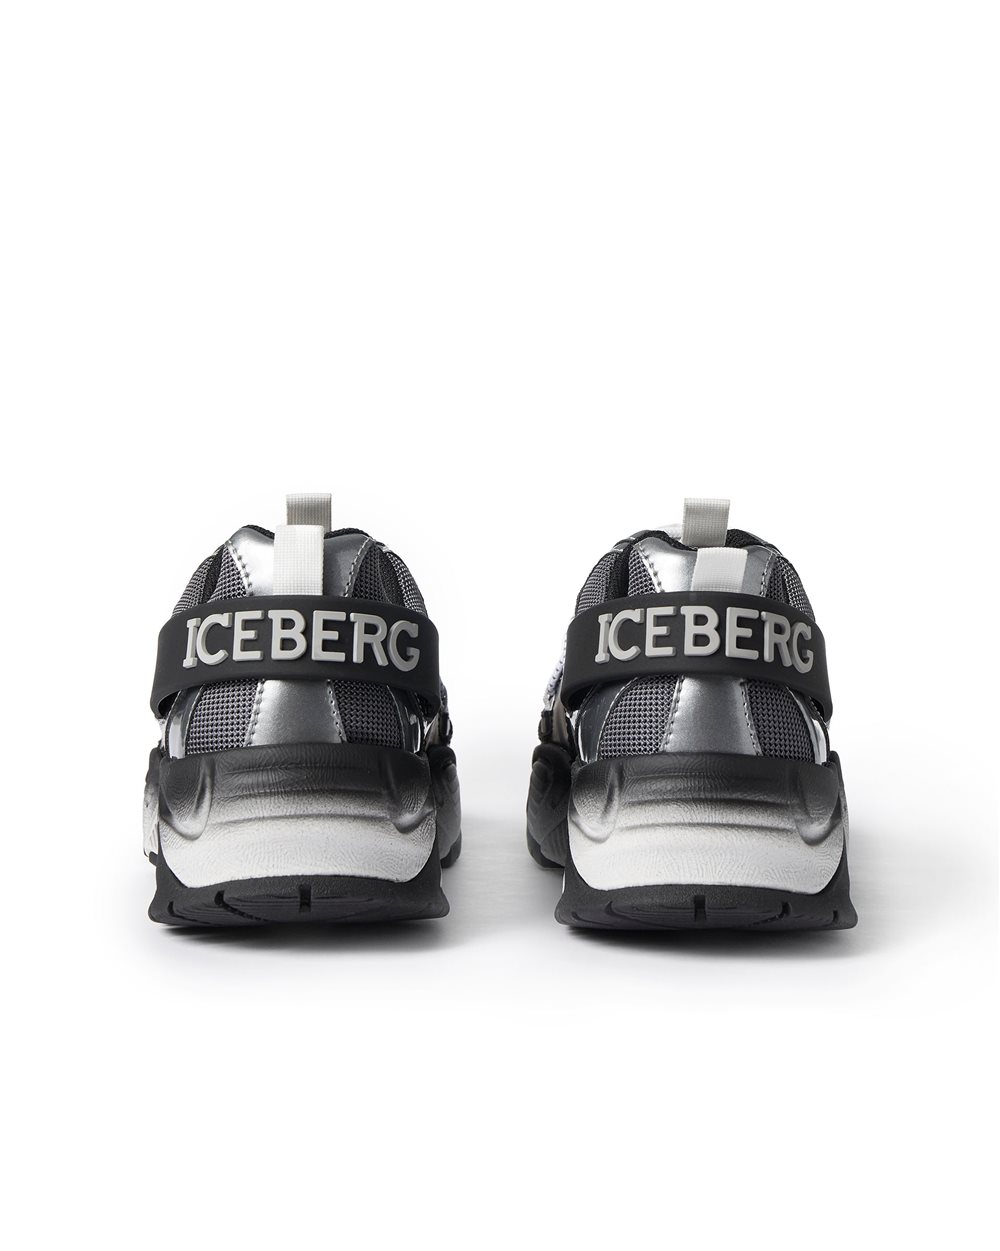 Spyder look subuck and leather sneakers - Iceberg - Official Website